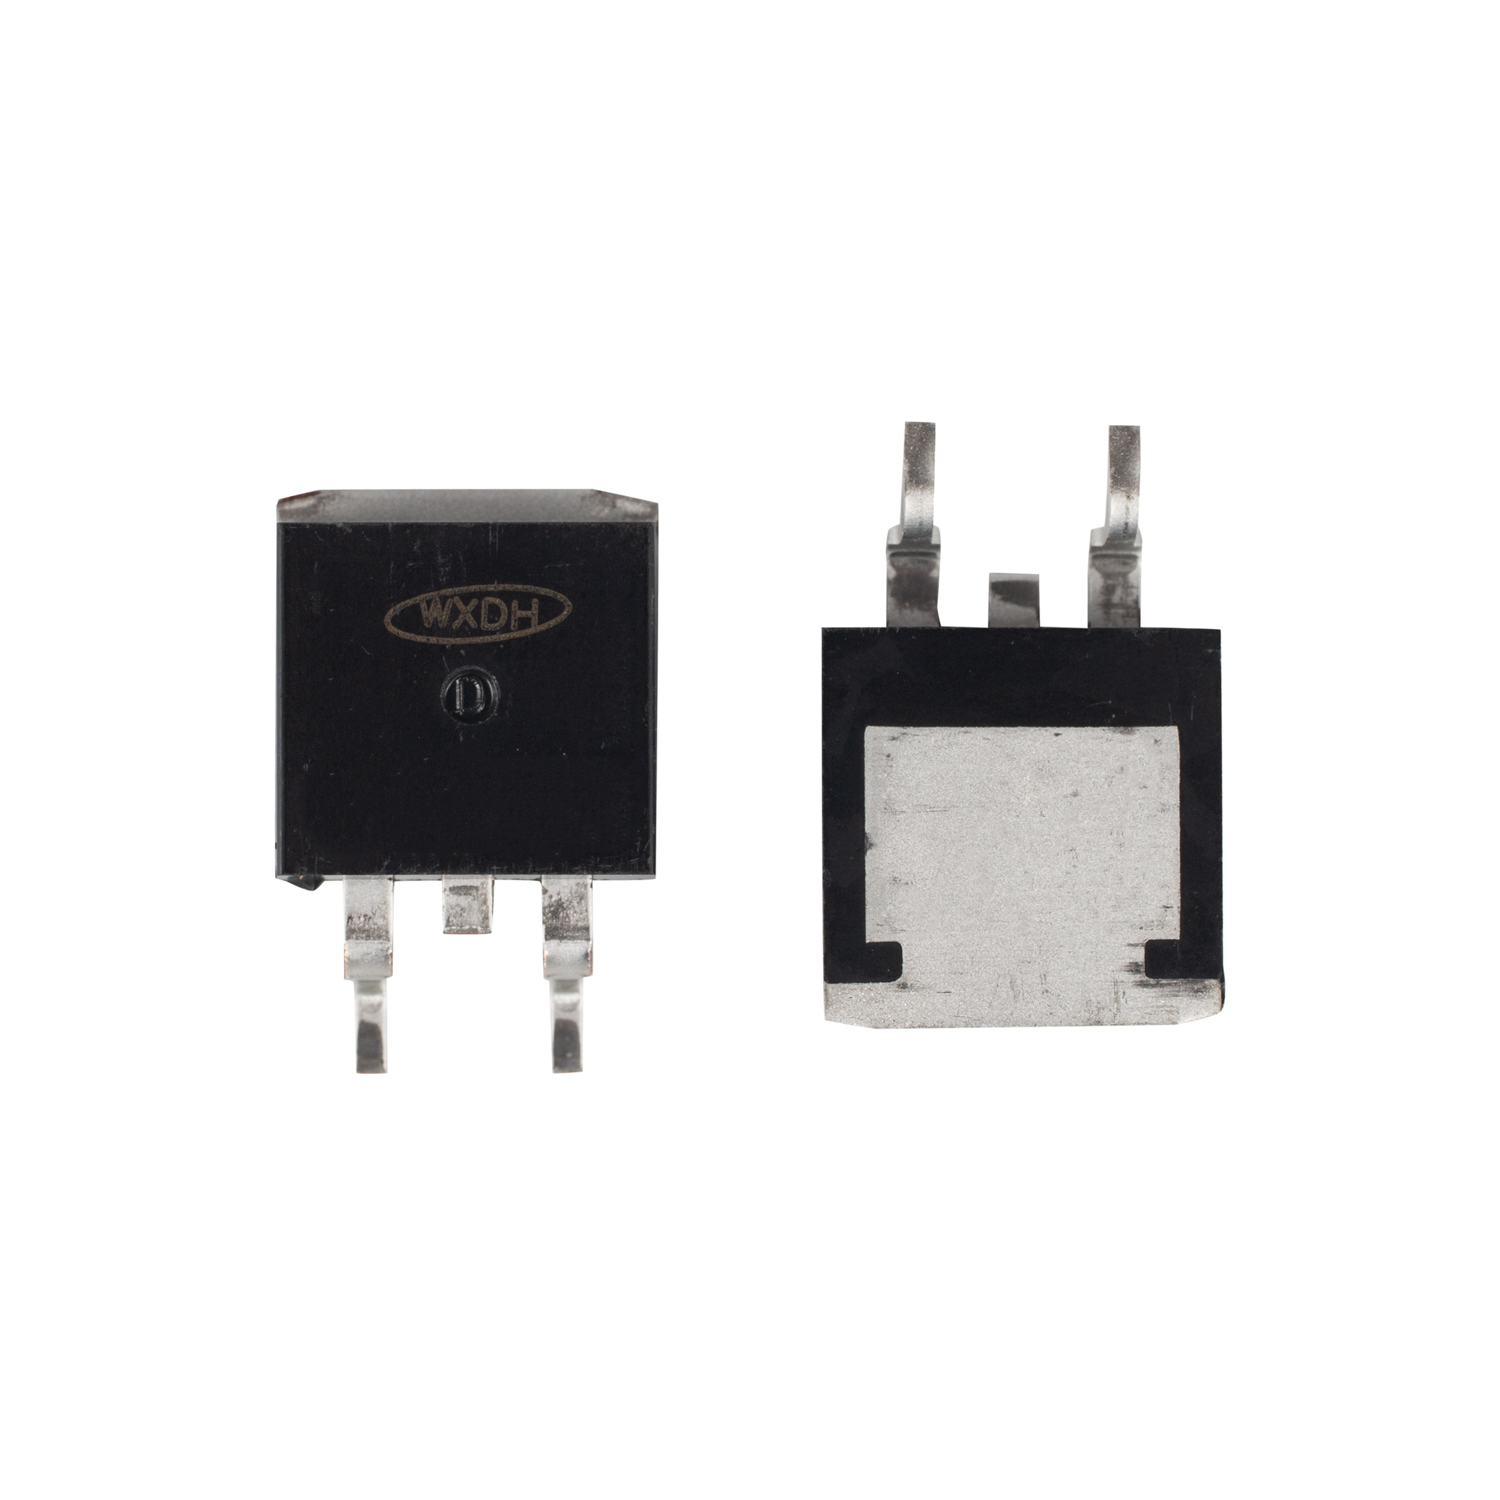  N-channel Enhancement Mode Power MOSFET 100A 68V